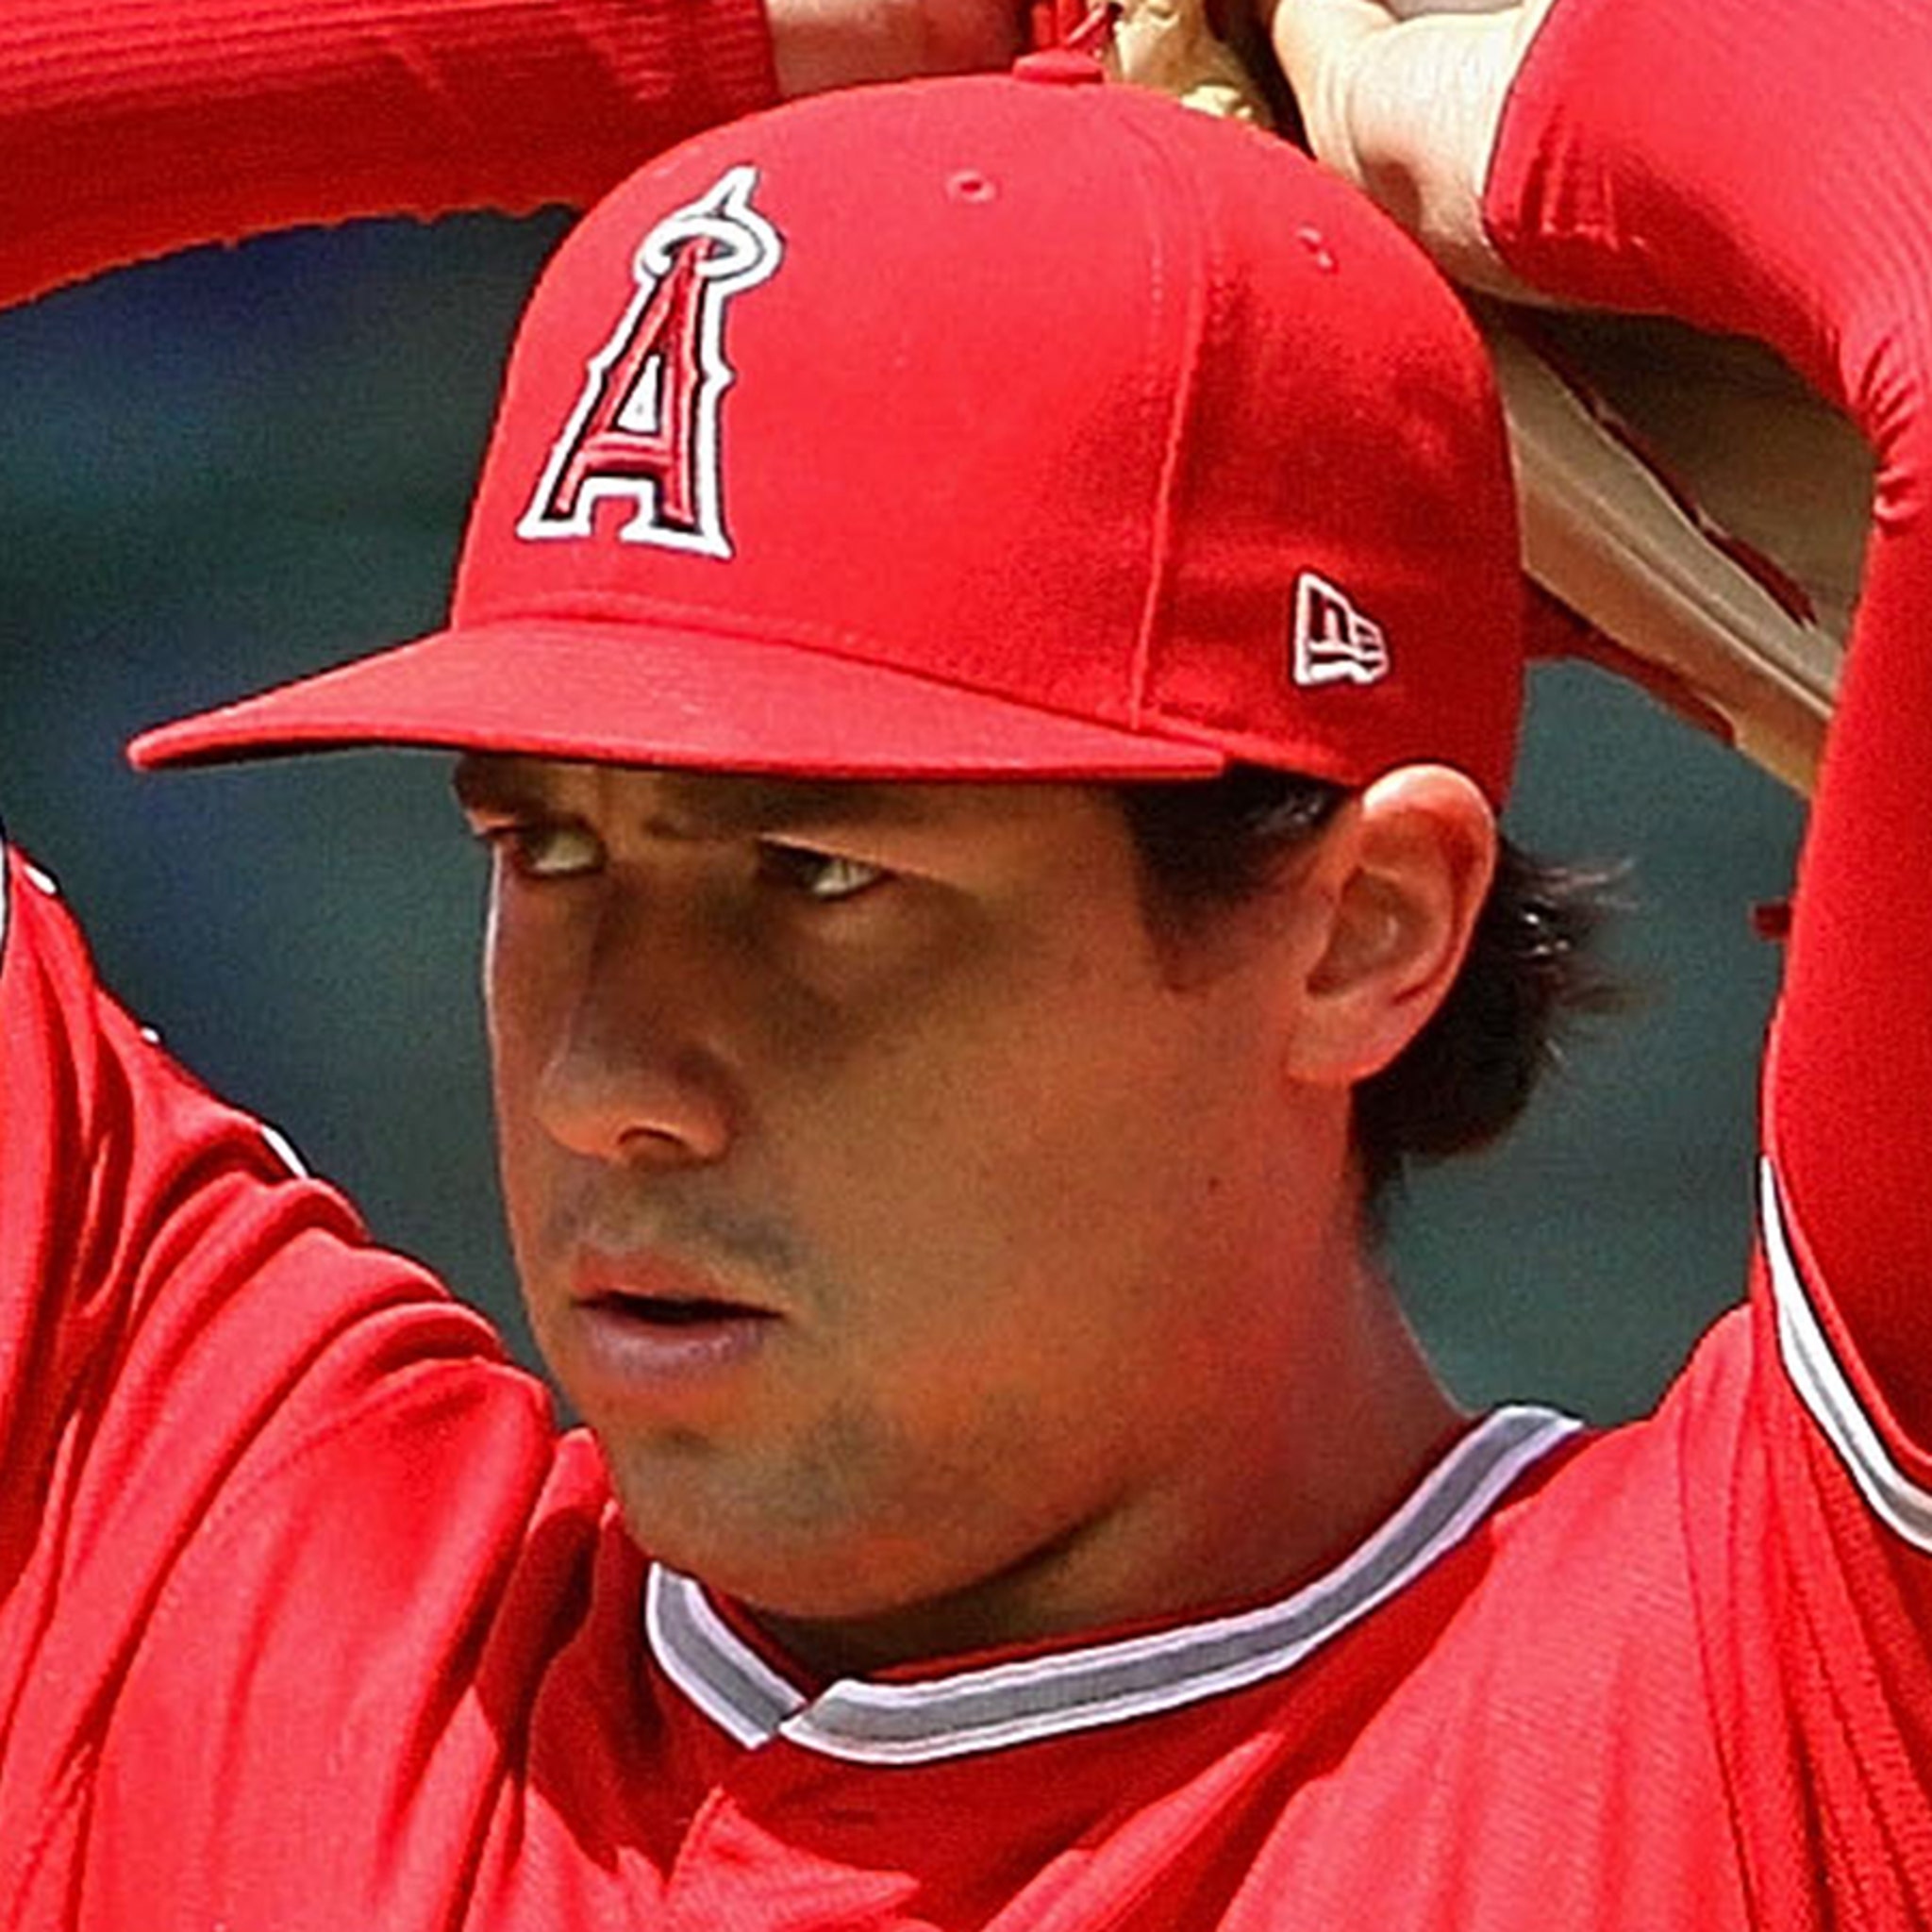 Los Angeles Angels Pitcher Tyler Skaggs Death Probed By DEA